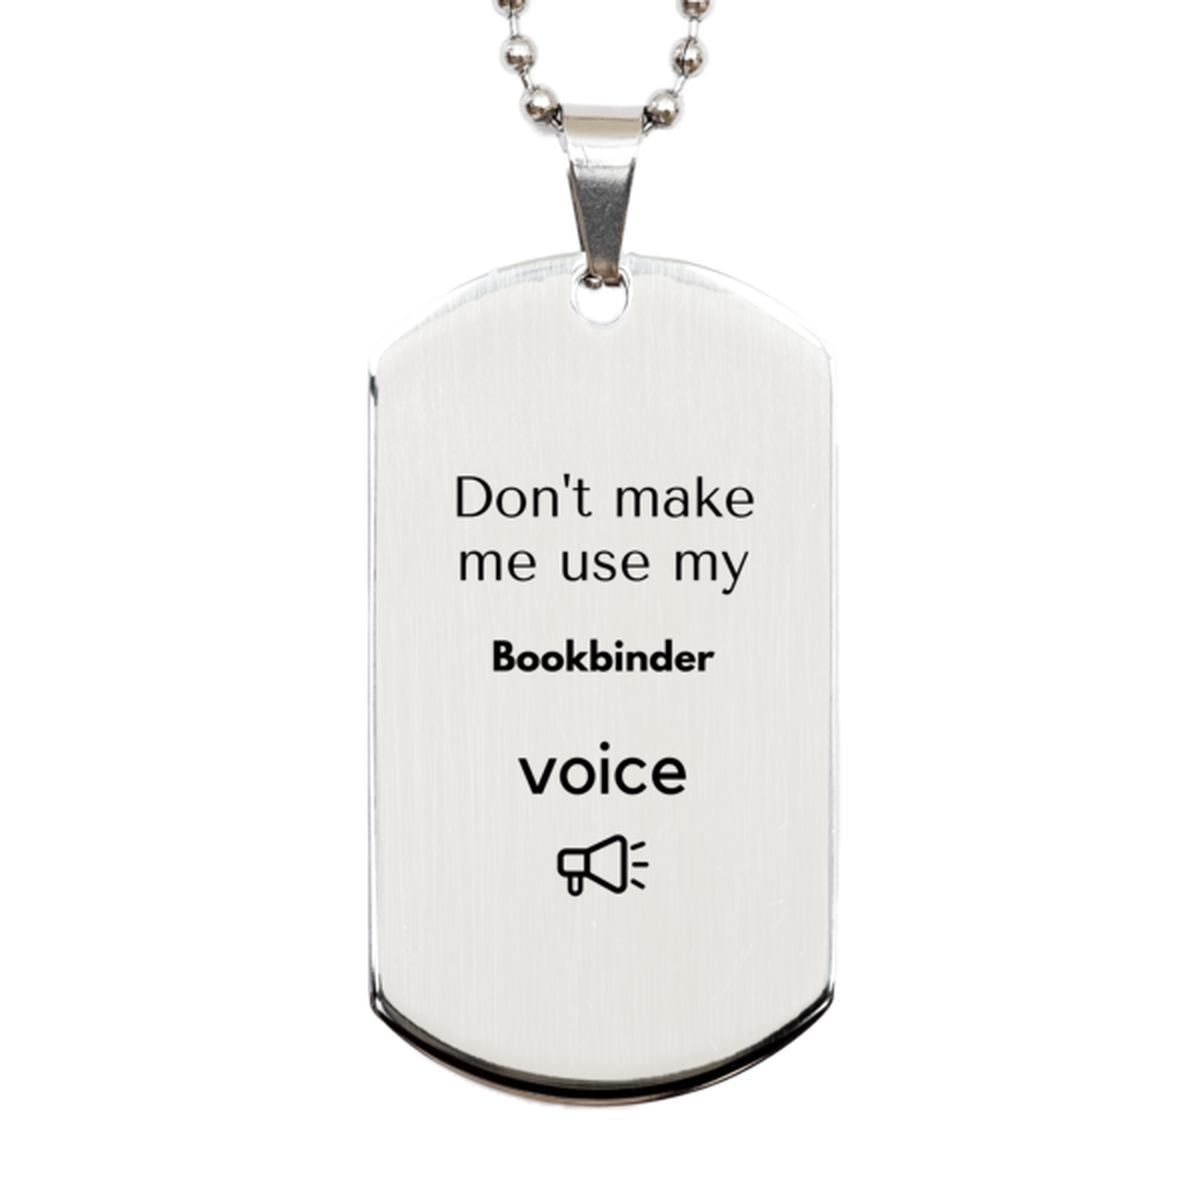 Don't make me use my Bookbinder voice, Sarcasm Bookbinder Gifts, Christmas Bookbinder Silver Dog Tag Birthday Unique Gifts For Bookbinder Coworkers, Men, Women, Colleague, Friends